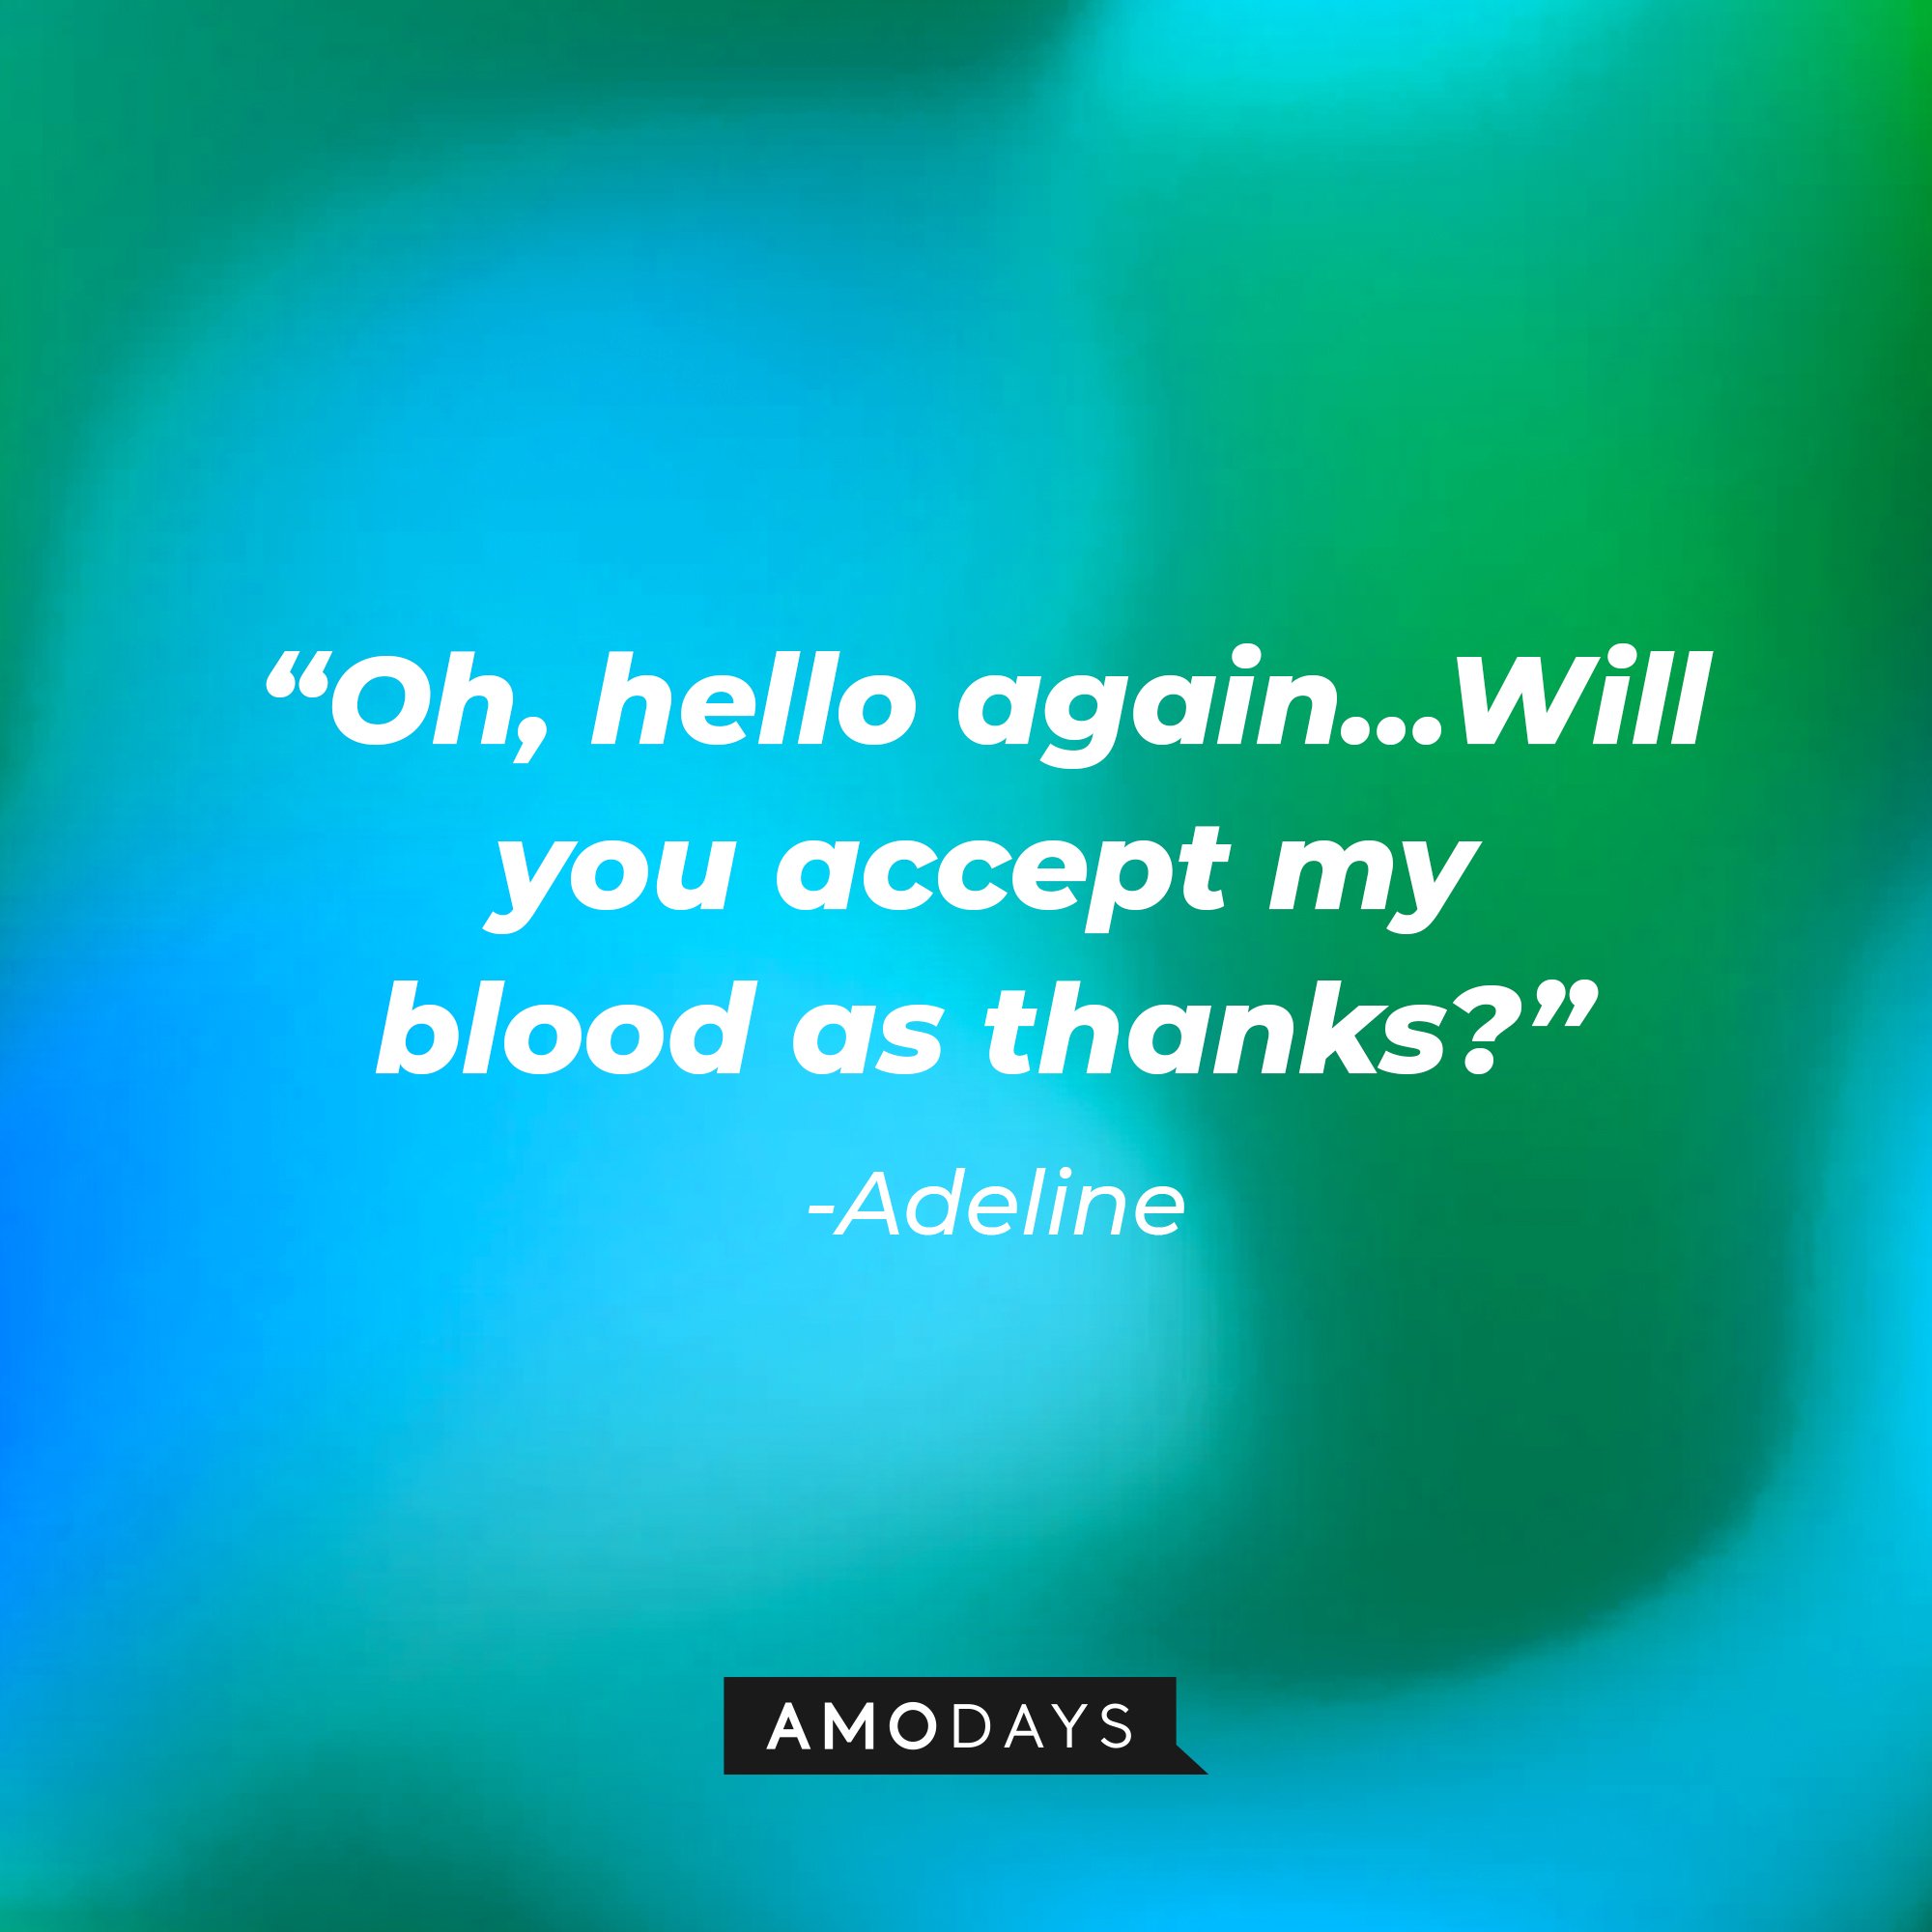 Adeline’s quote: "Oh, hello again…Will you accept my blood as thanks?" | Image: AmoDays